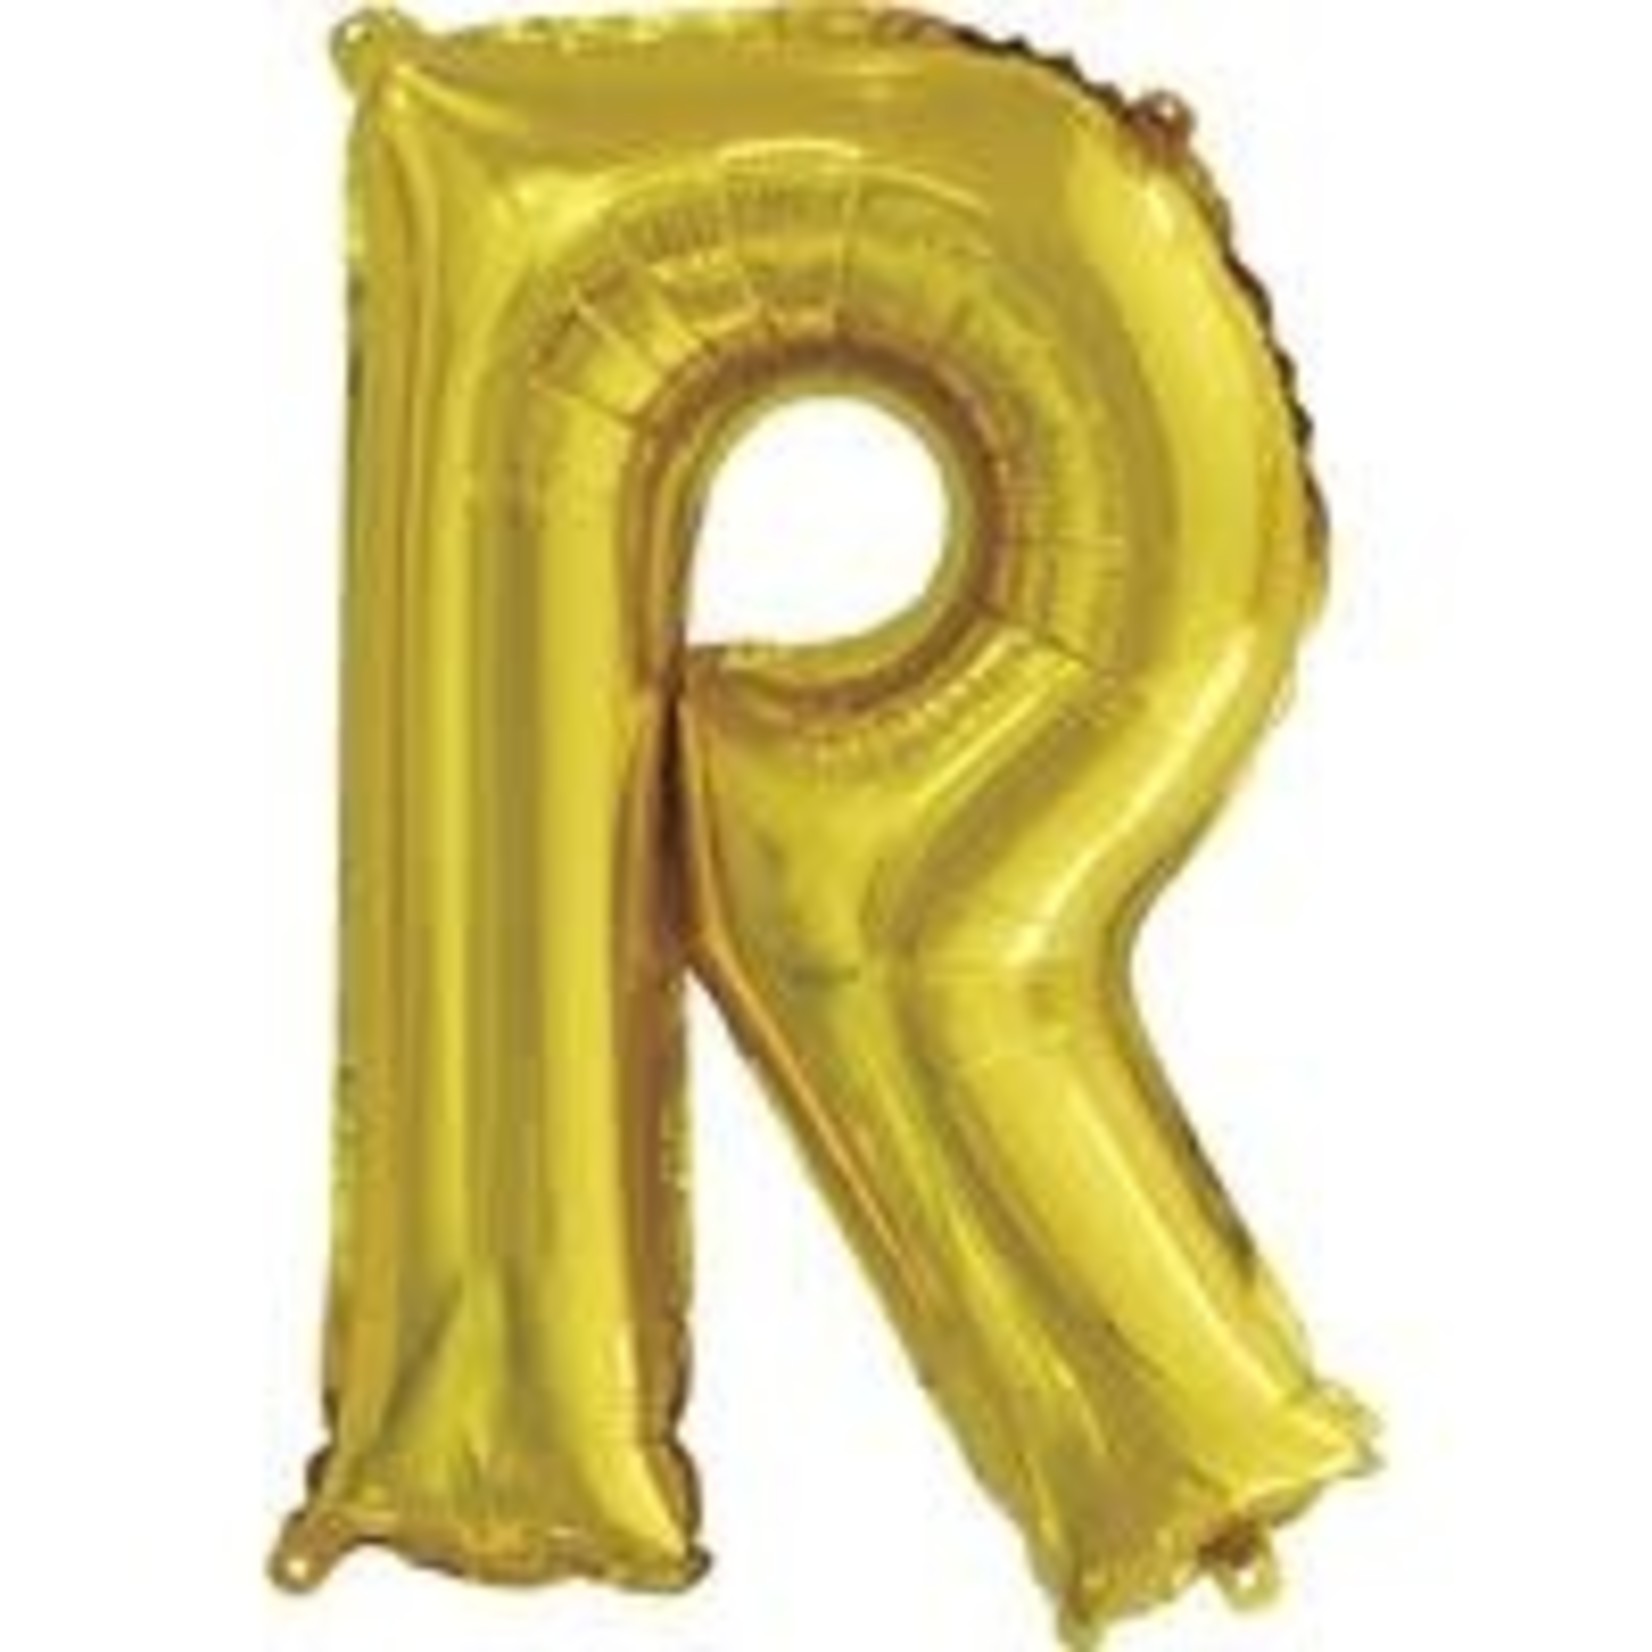 unique 14" Gold "R" Air-Filled Mylar Balloon - 1ct.